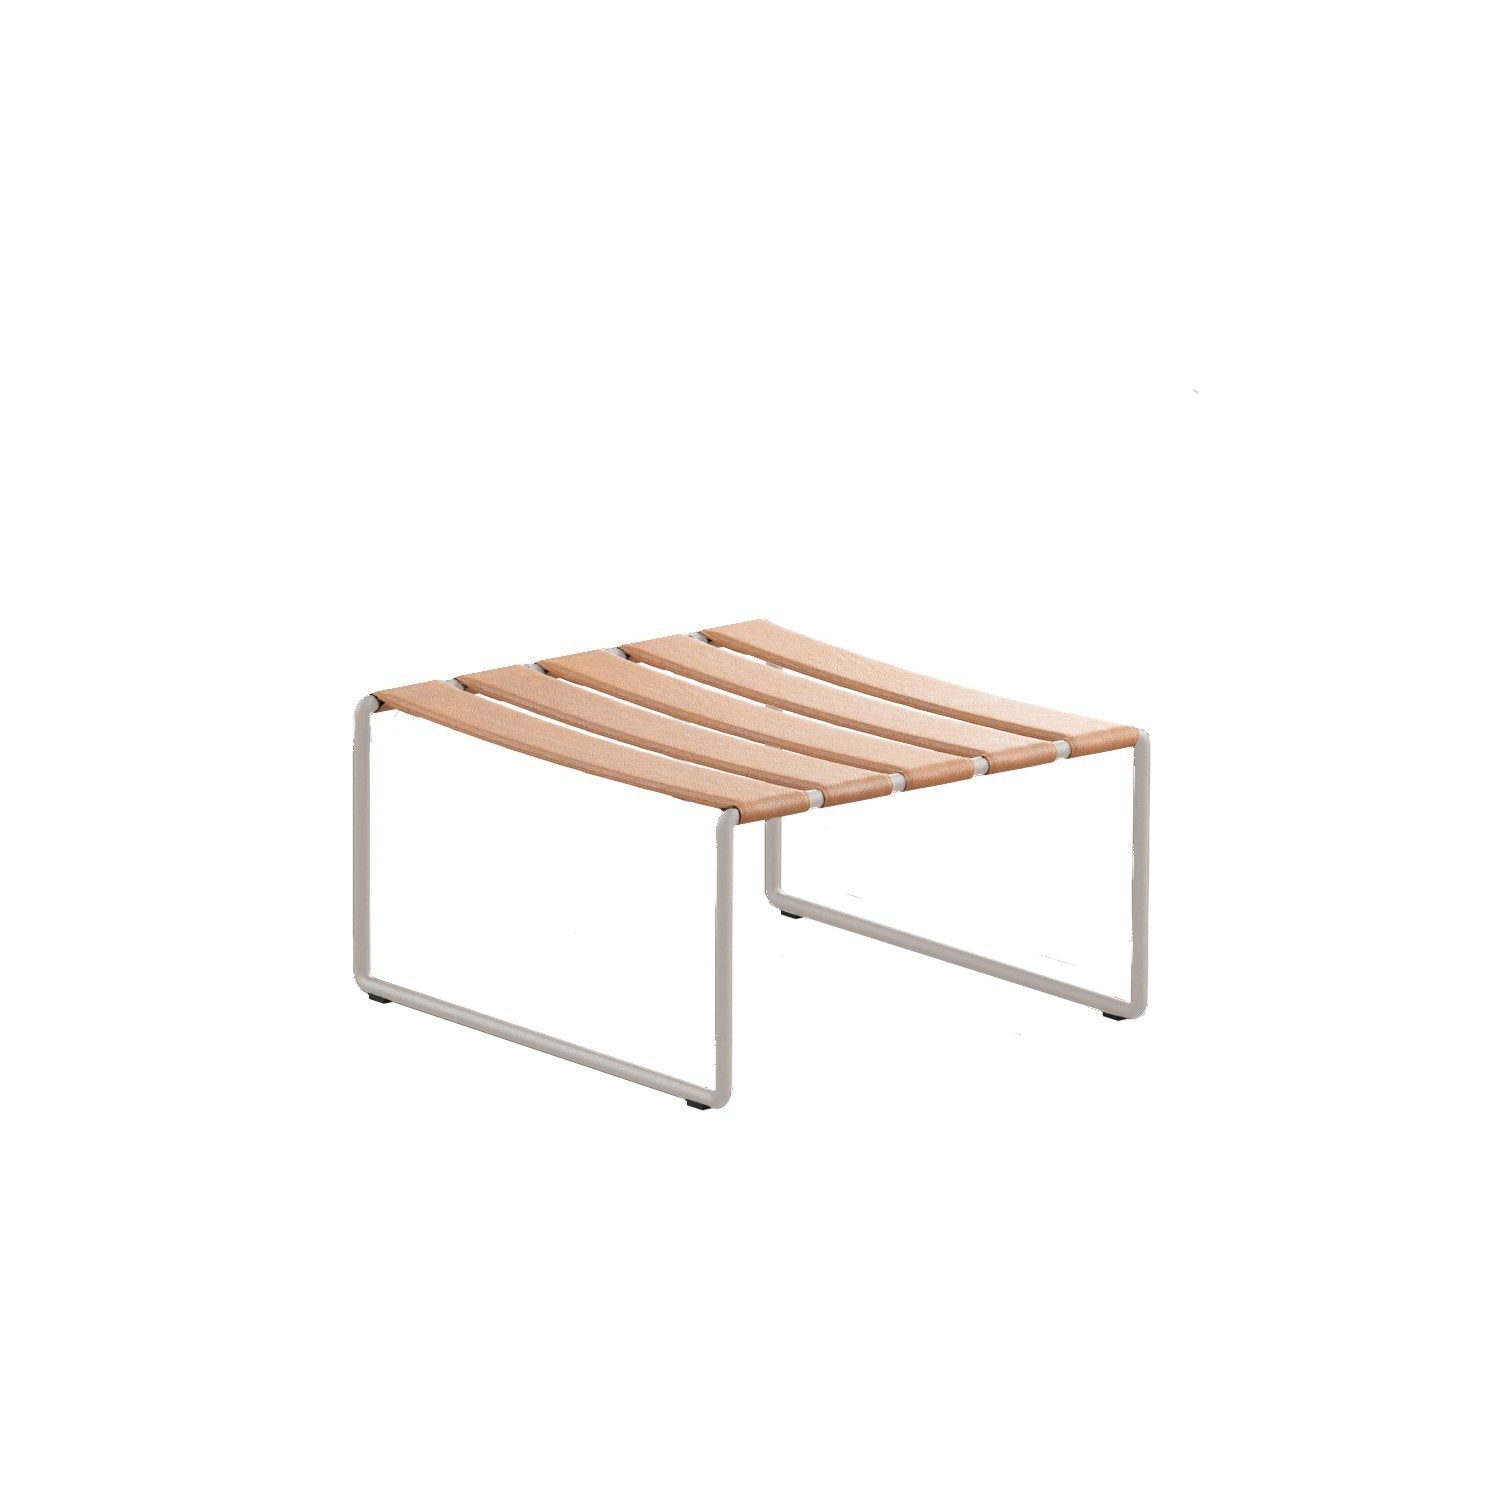 Strappy footstool in cognac